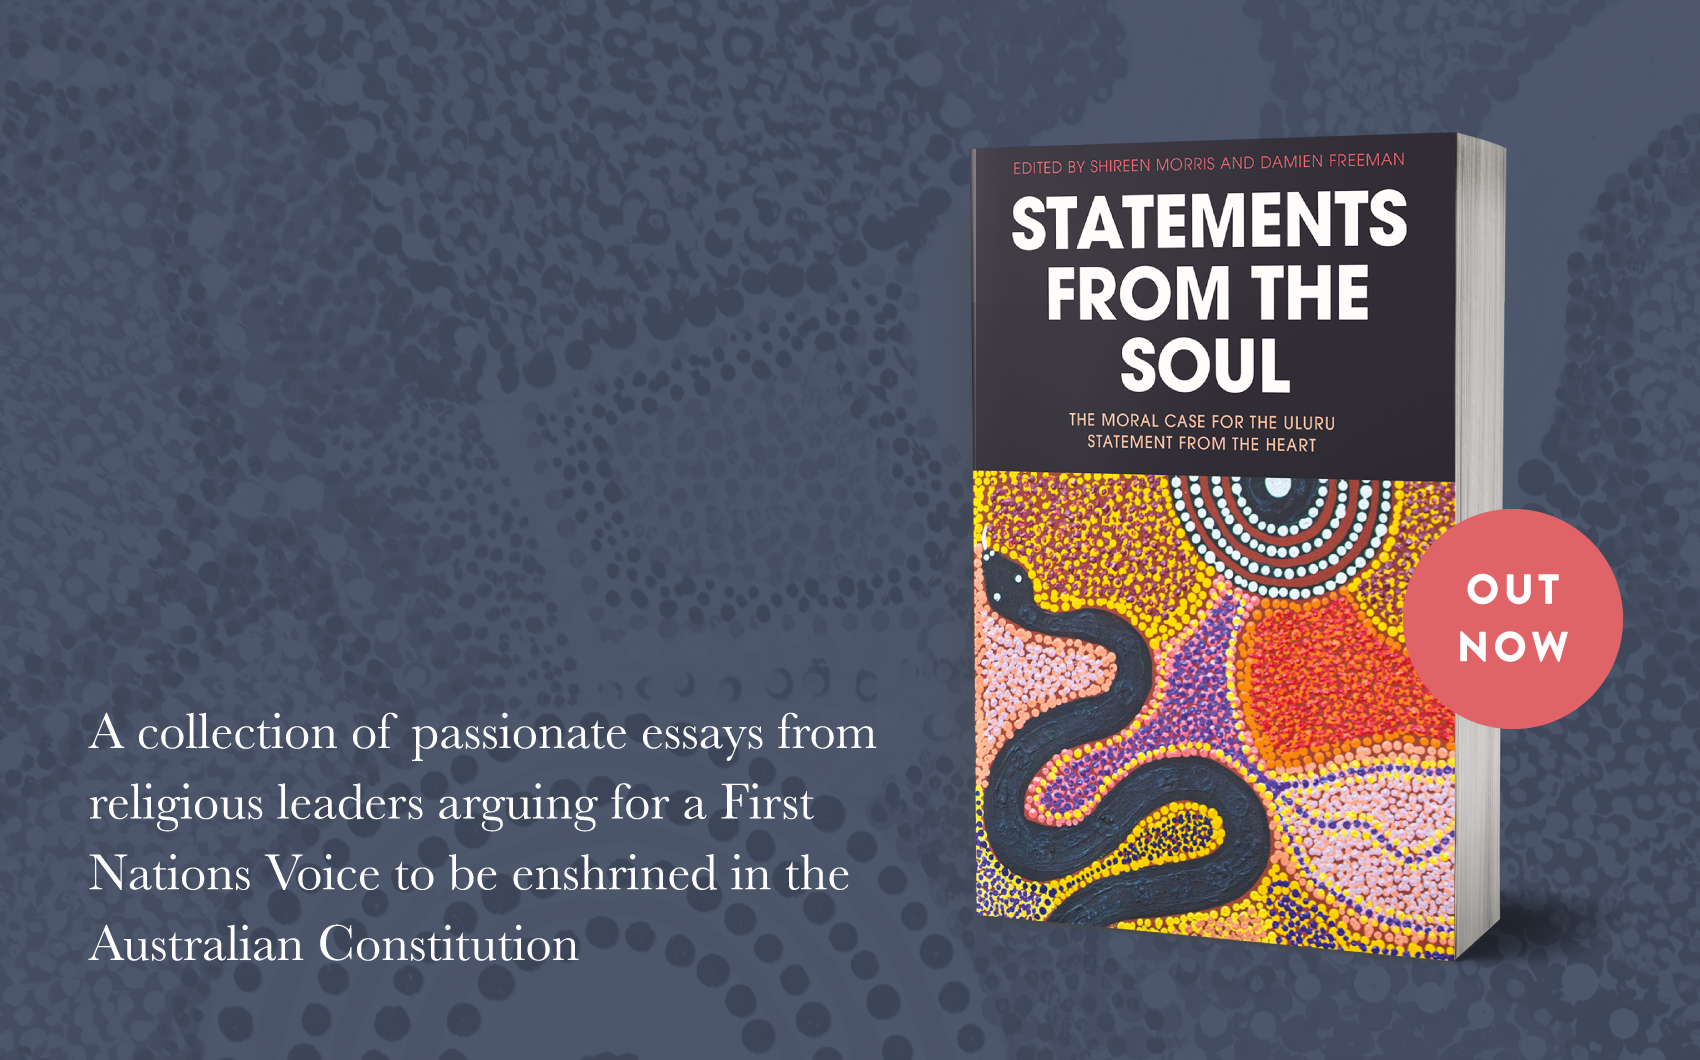 Out now: Statements from the Soul